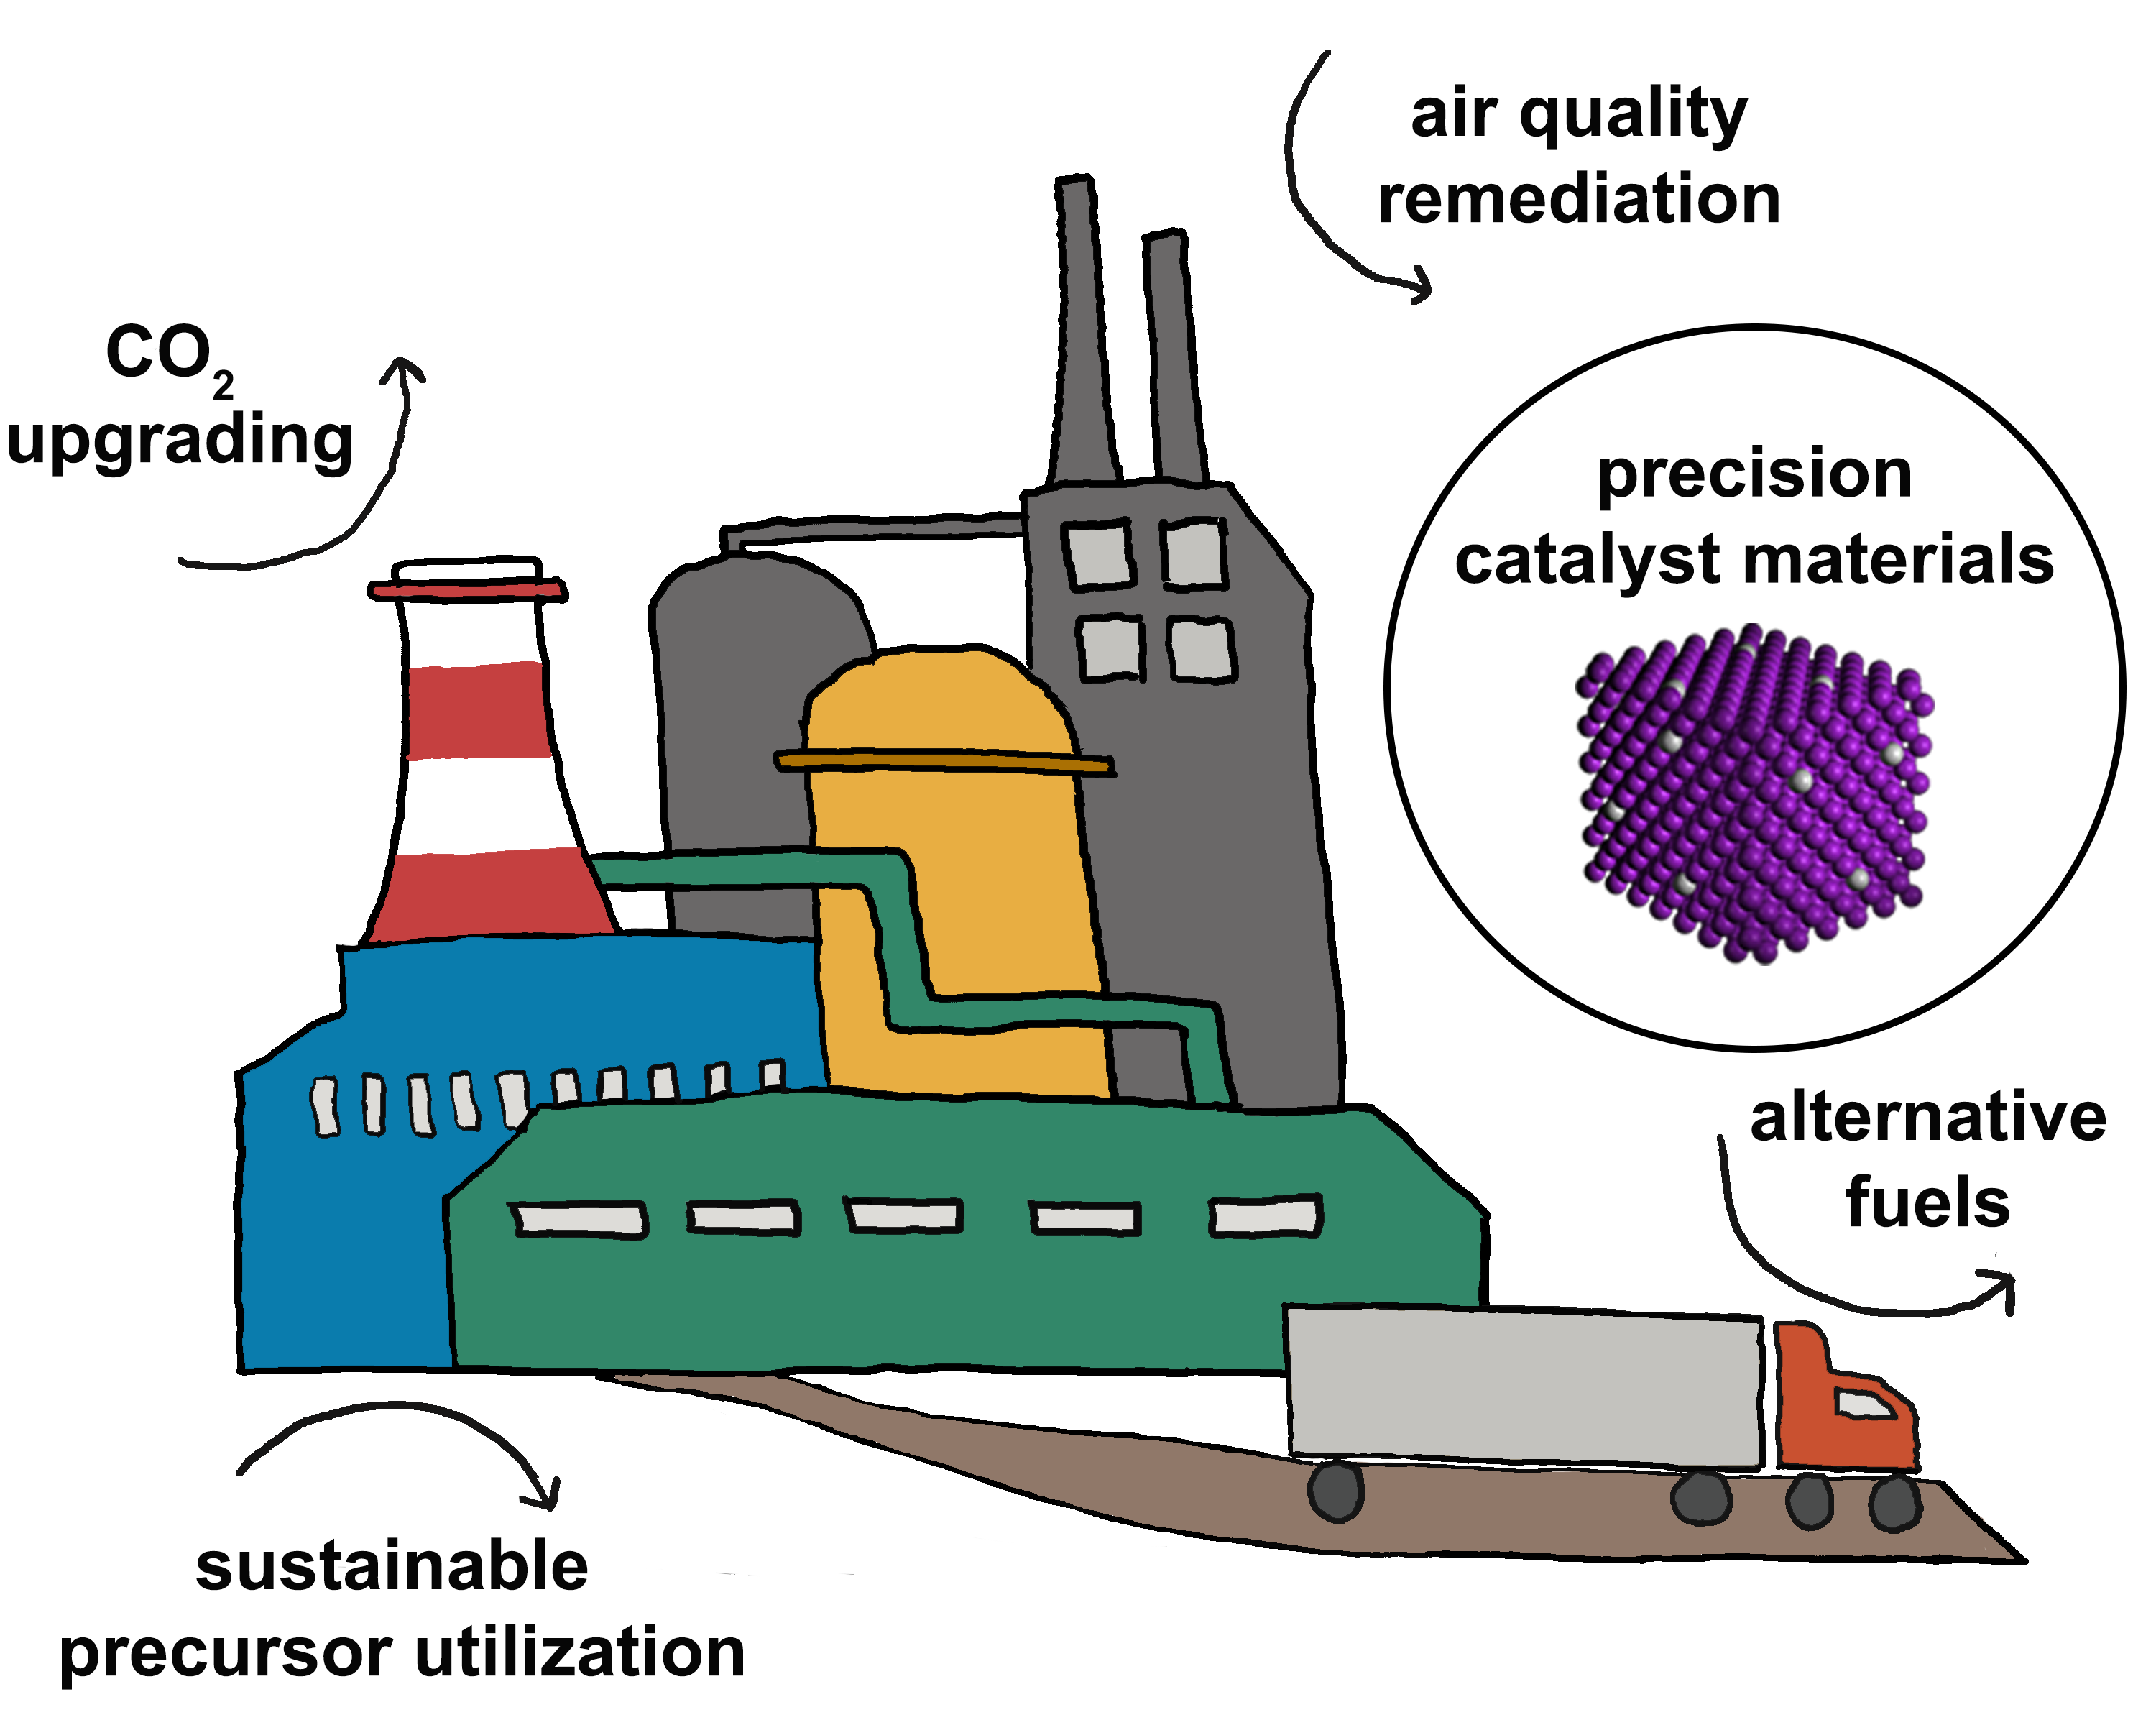 Cartoon of a factory with labels for different chemical processes (CO2 upgrading, sustainable precursor utilization, alternative fuels)